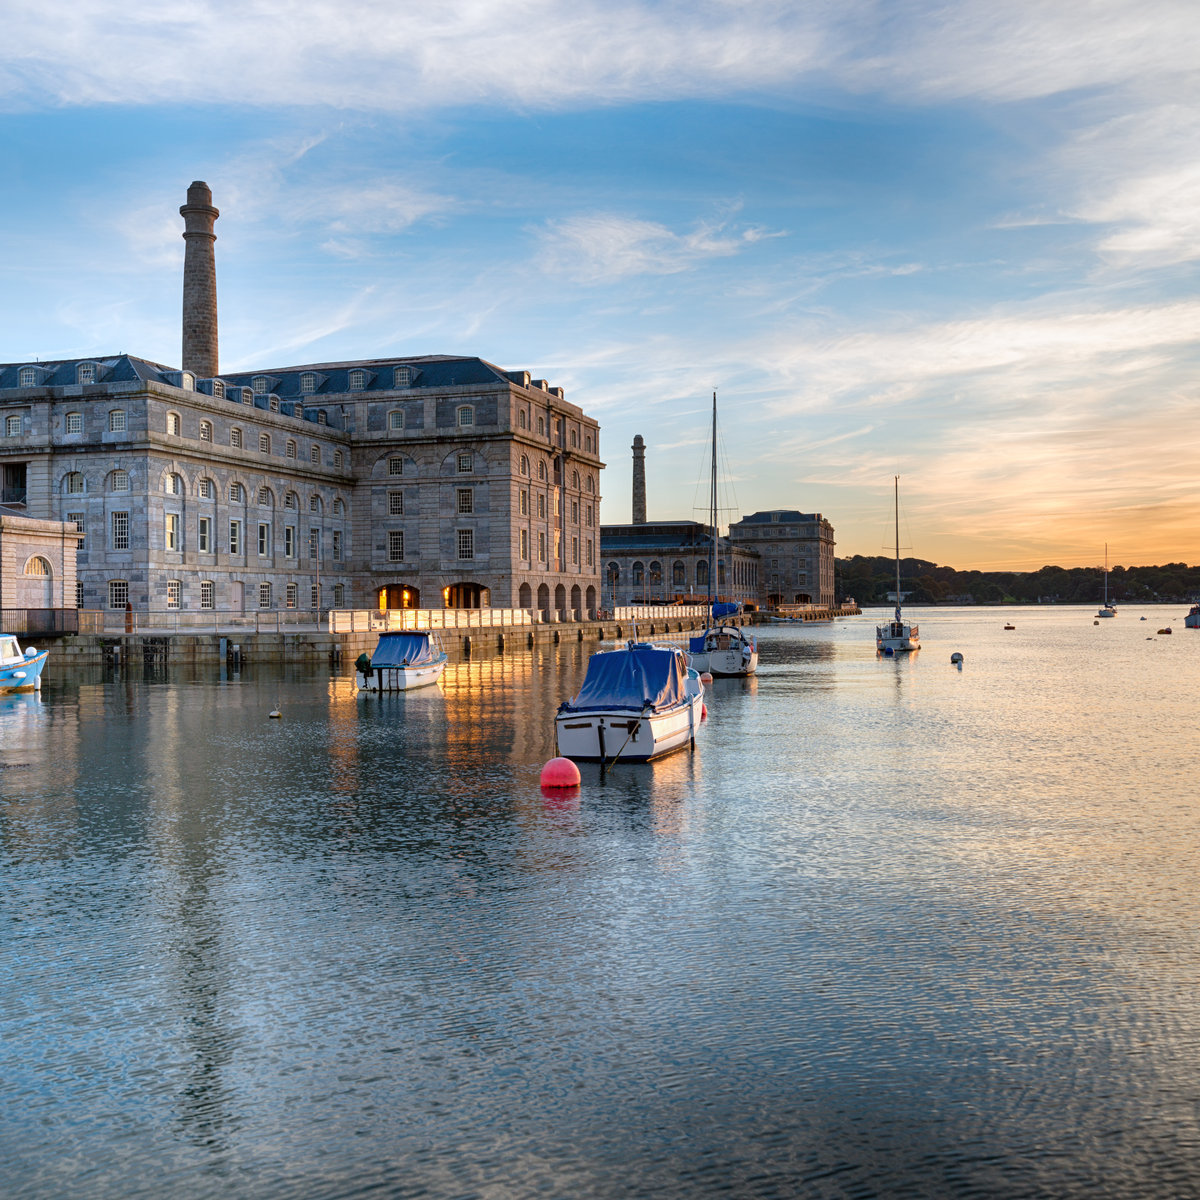 IMAGE: Royal William Yard from the water